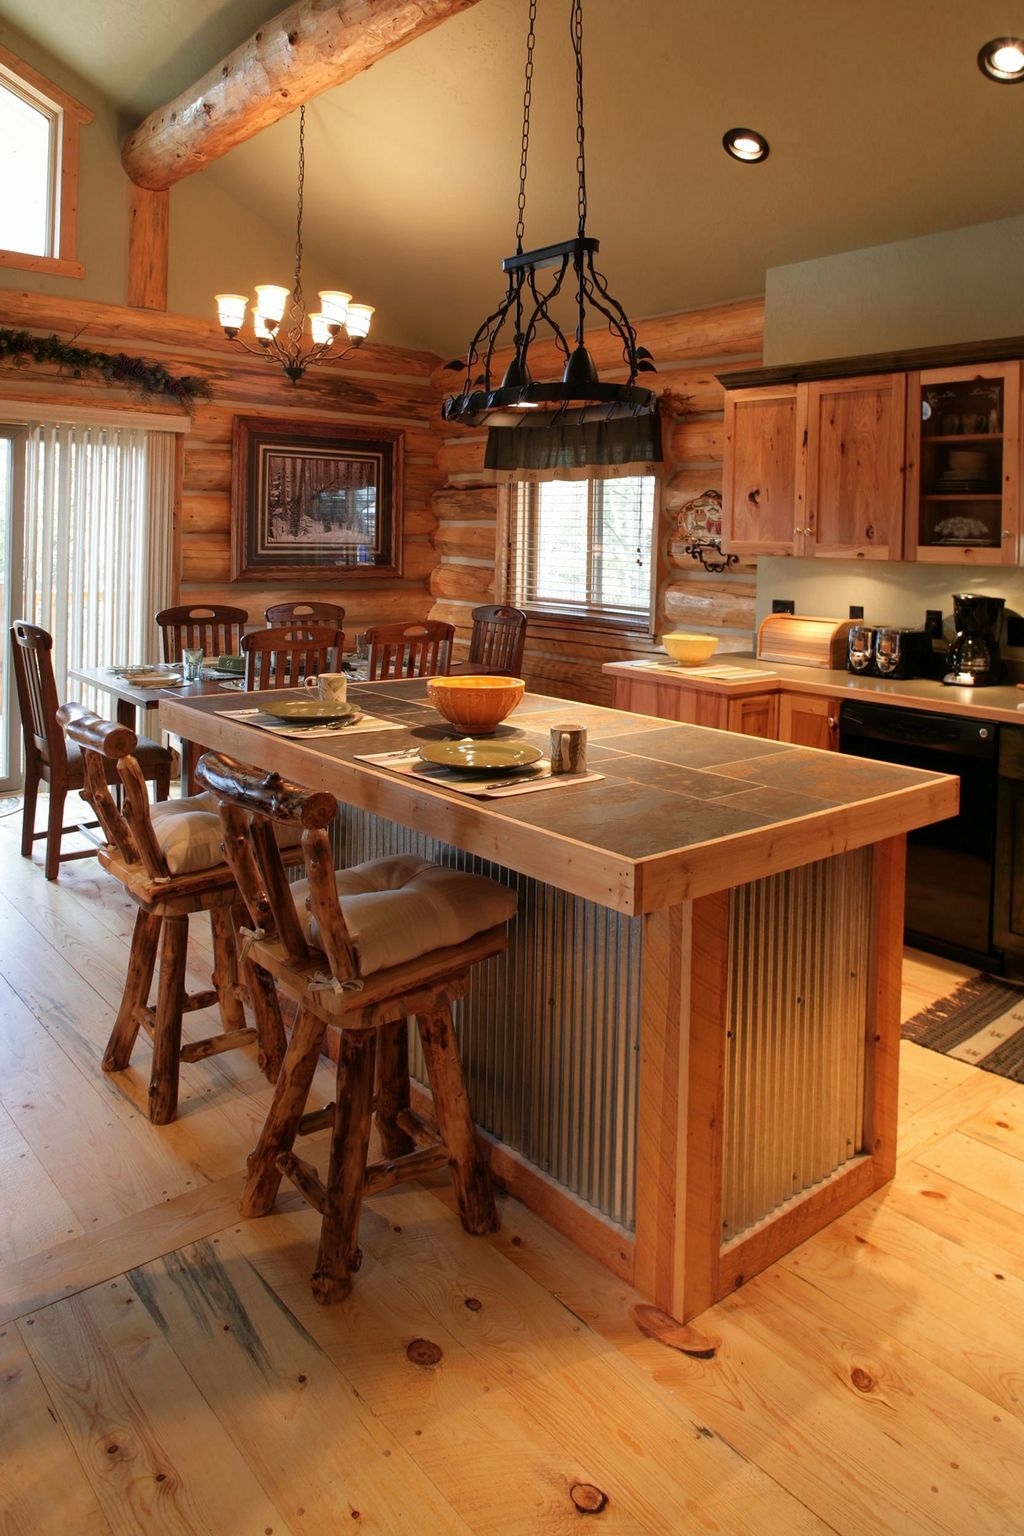 40 Warm Cozy Rustic Kitchen Designs For Your Cabin - BESTHOMISH